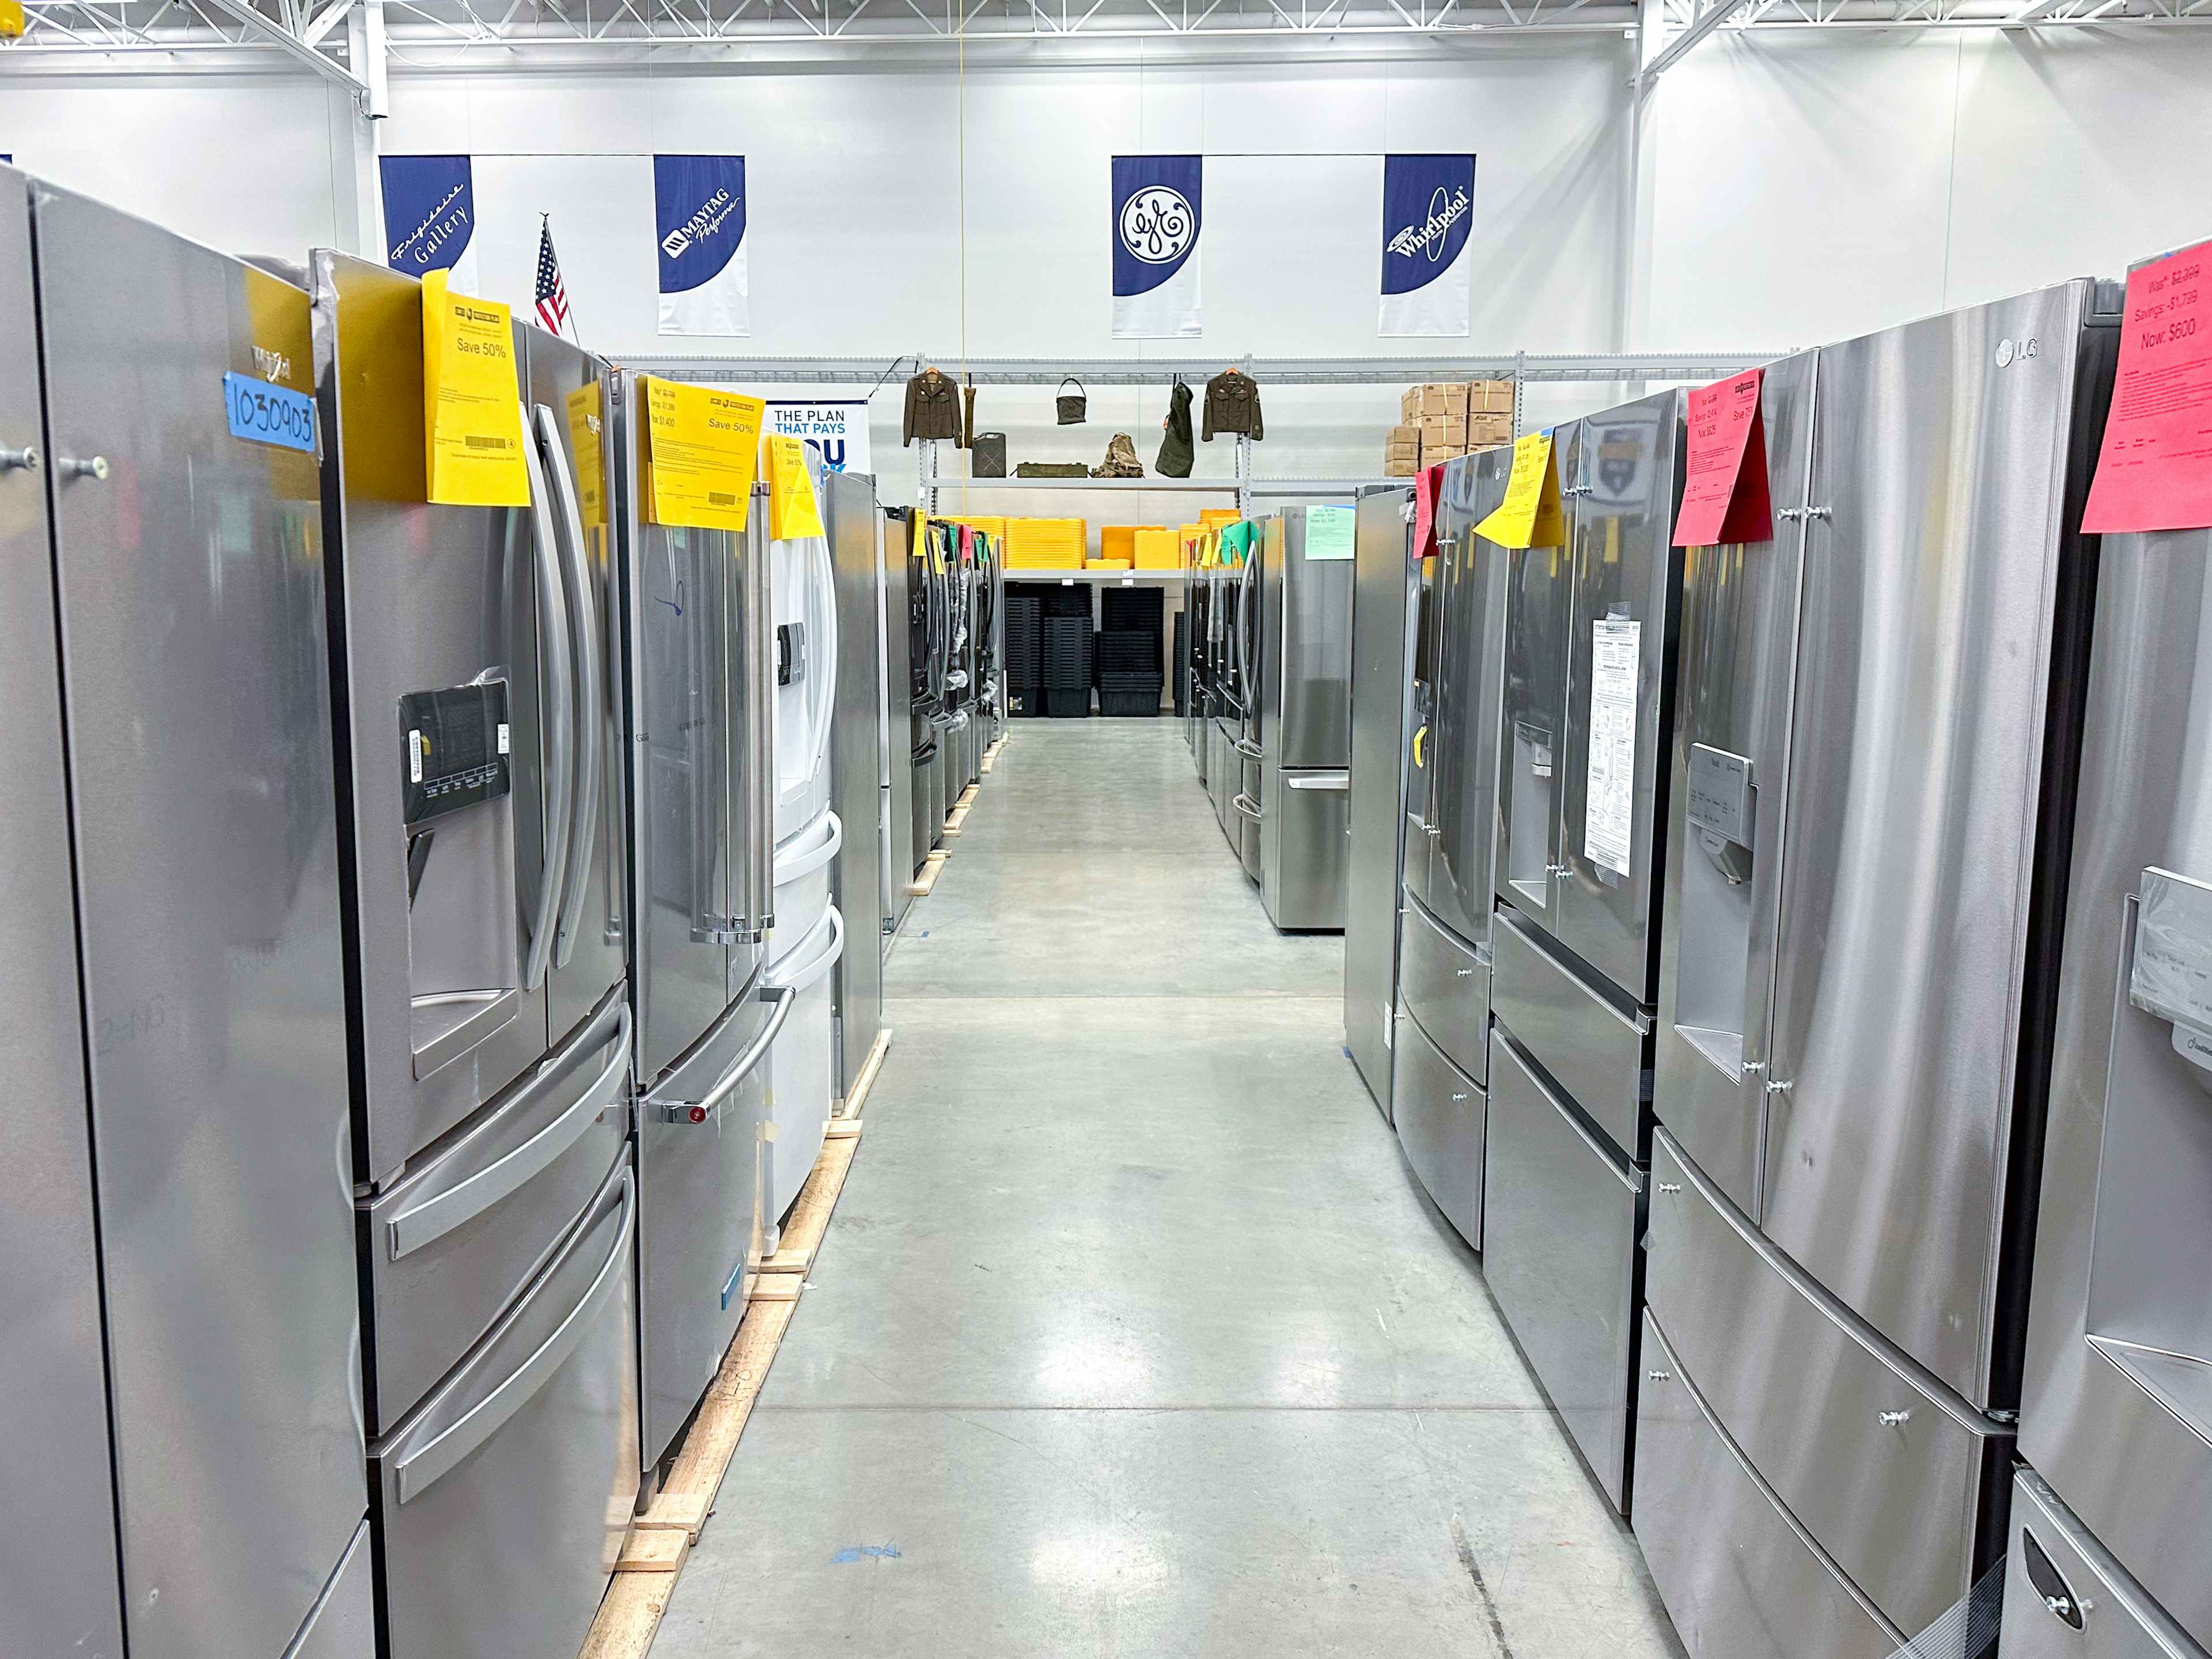 A row of discounted scratch and dent appliances at a Lowe's Outlet store